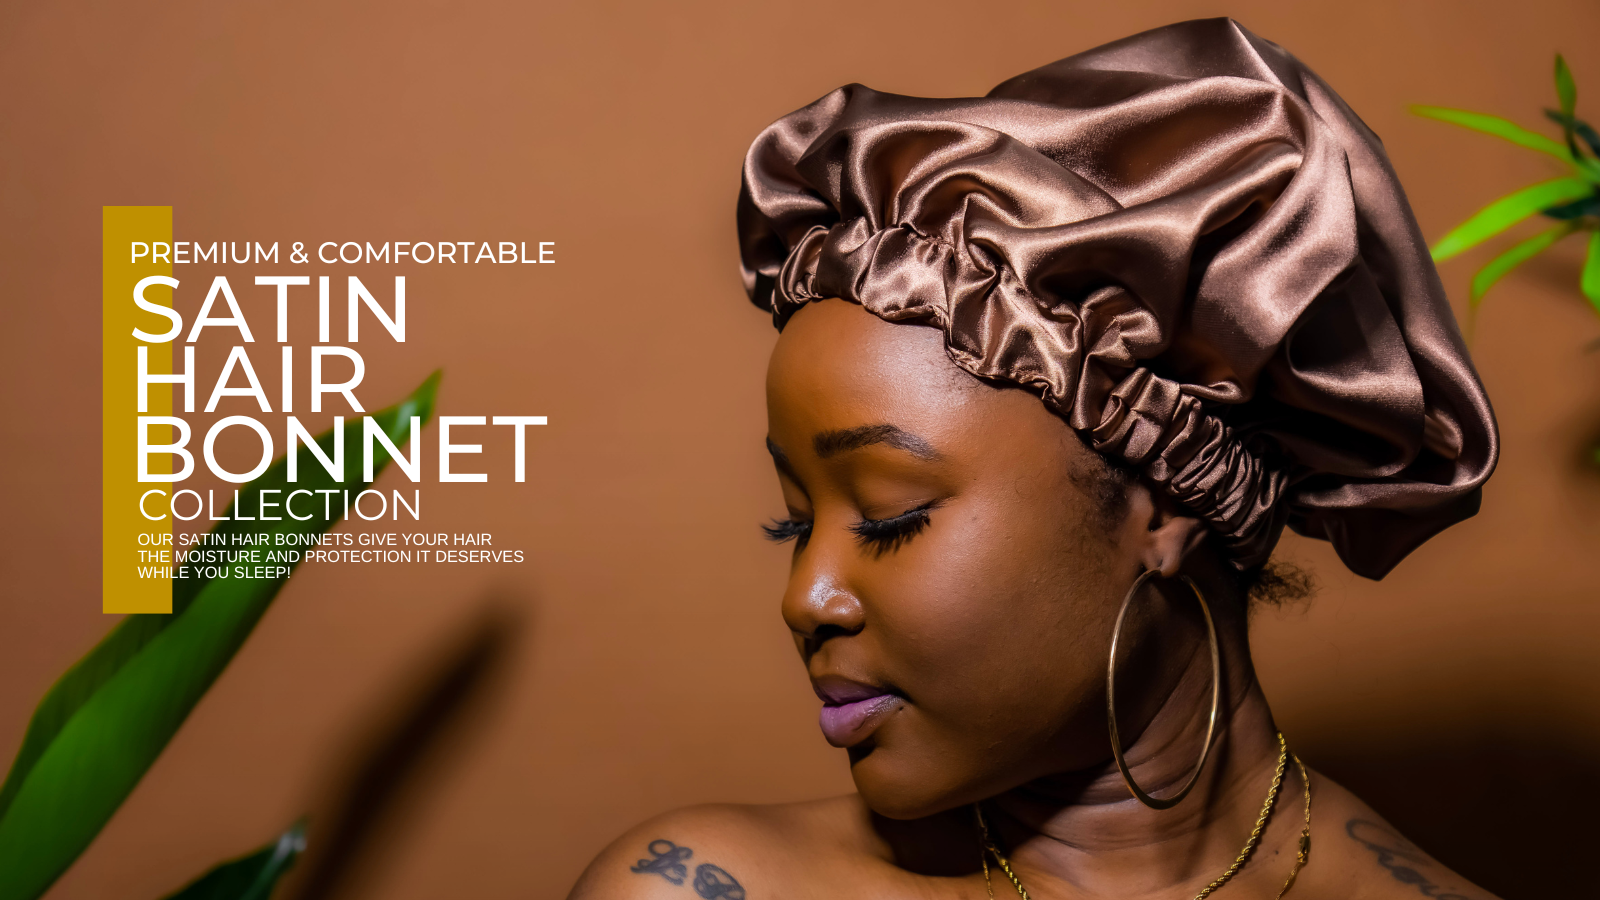 Premium Satin Hair Bonnet Collection our satin hair bonnets give your hair the moisture and protection it deserves while you sleep!